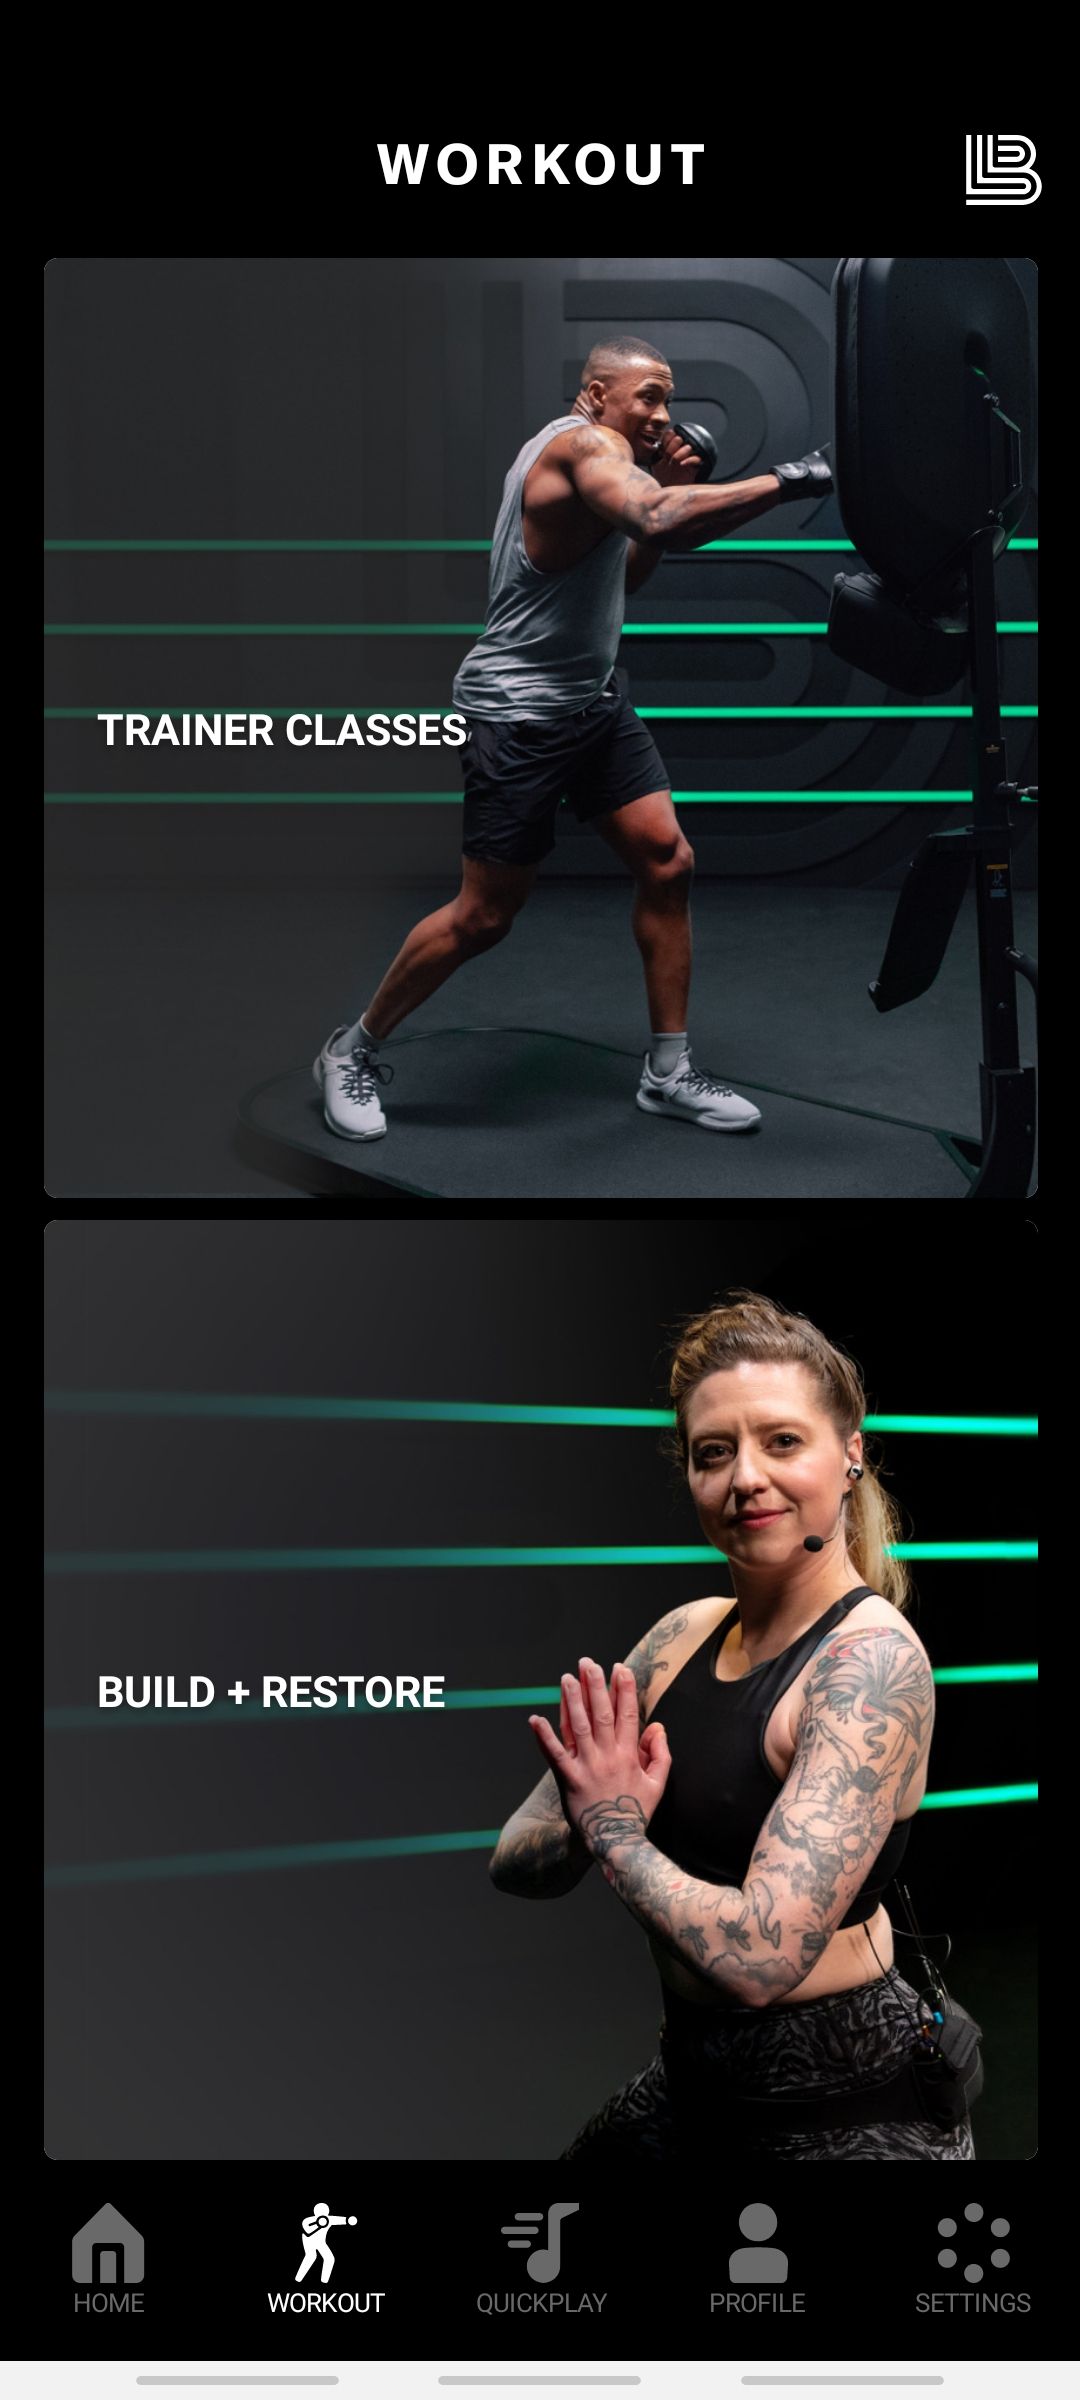 liteboxer workout courses including trainer classes and restorative training